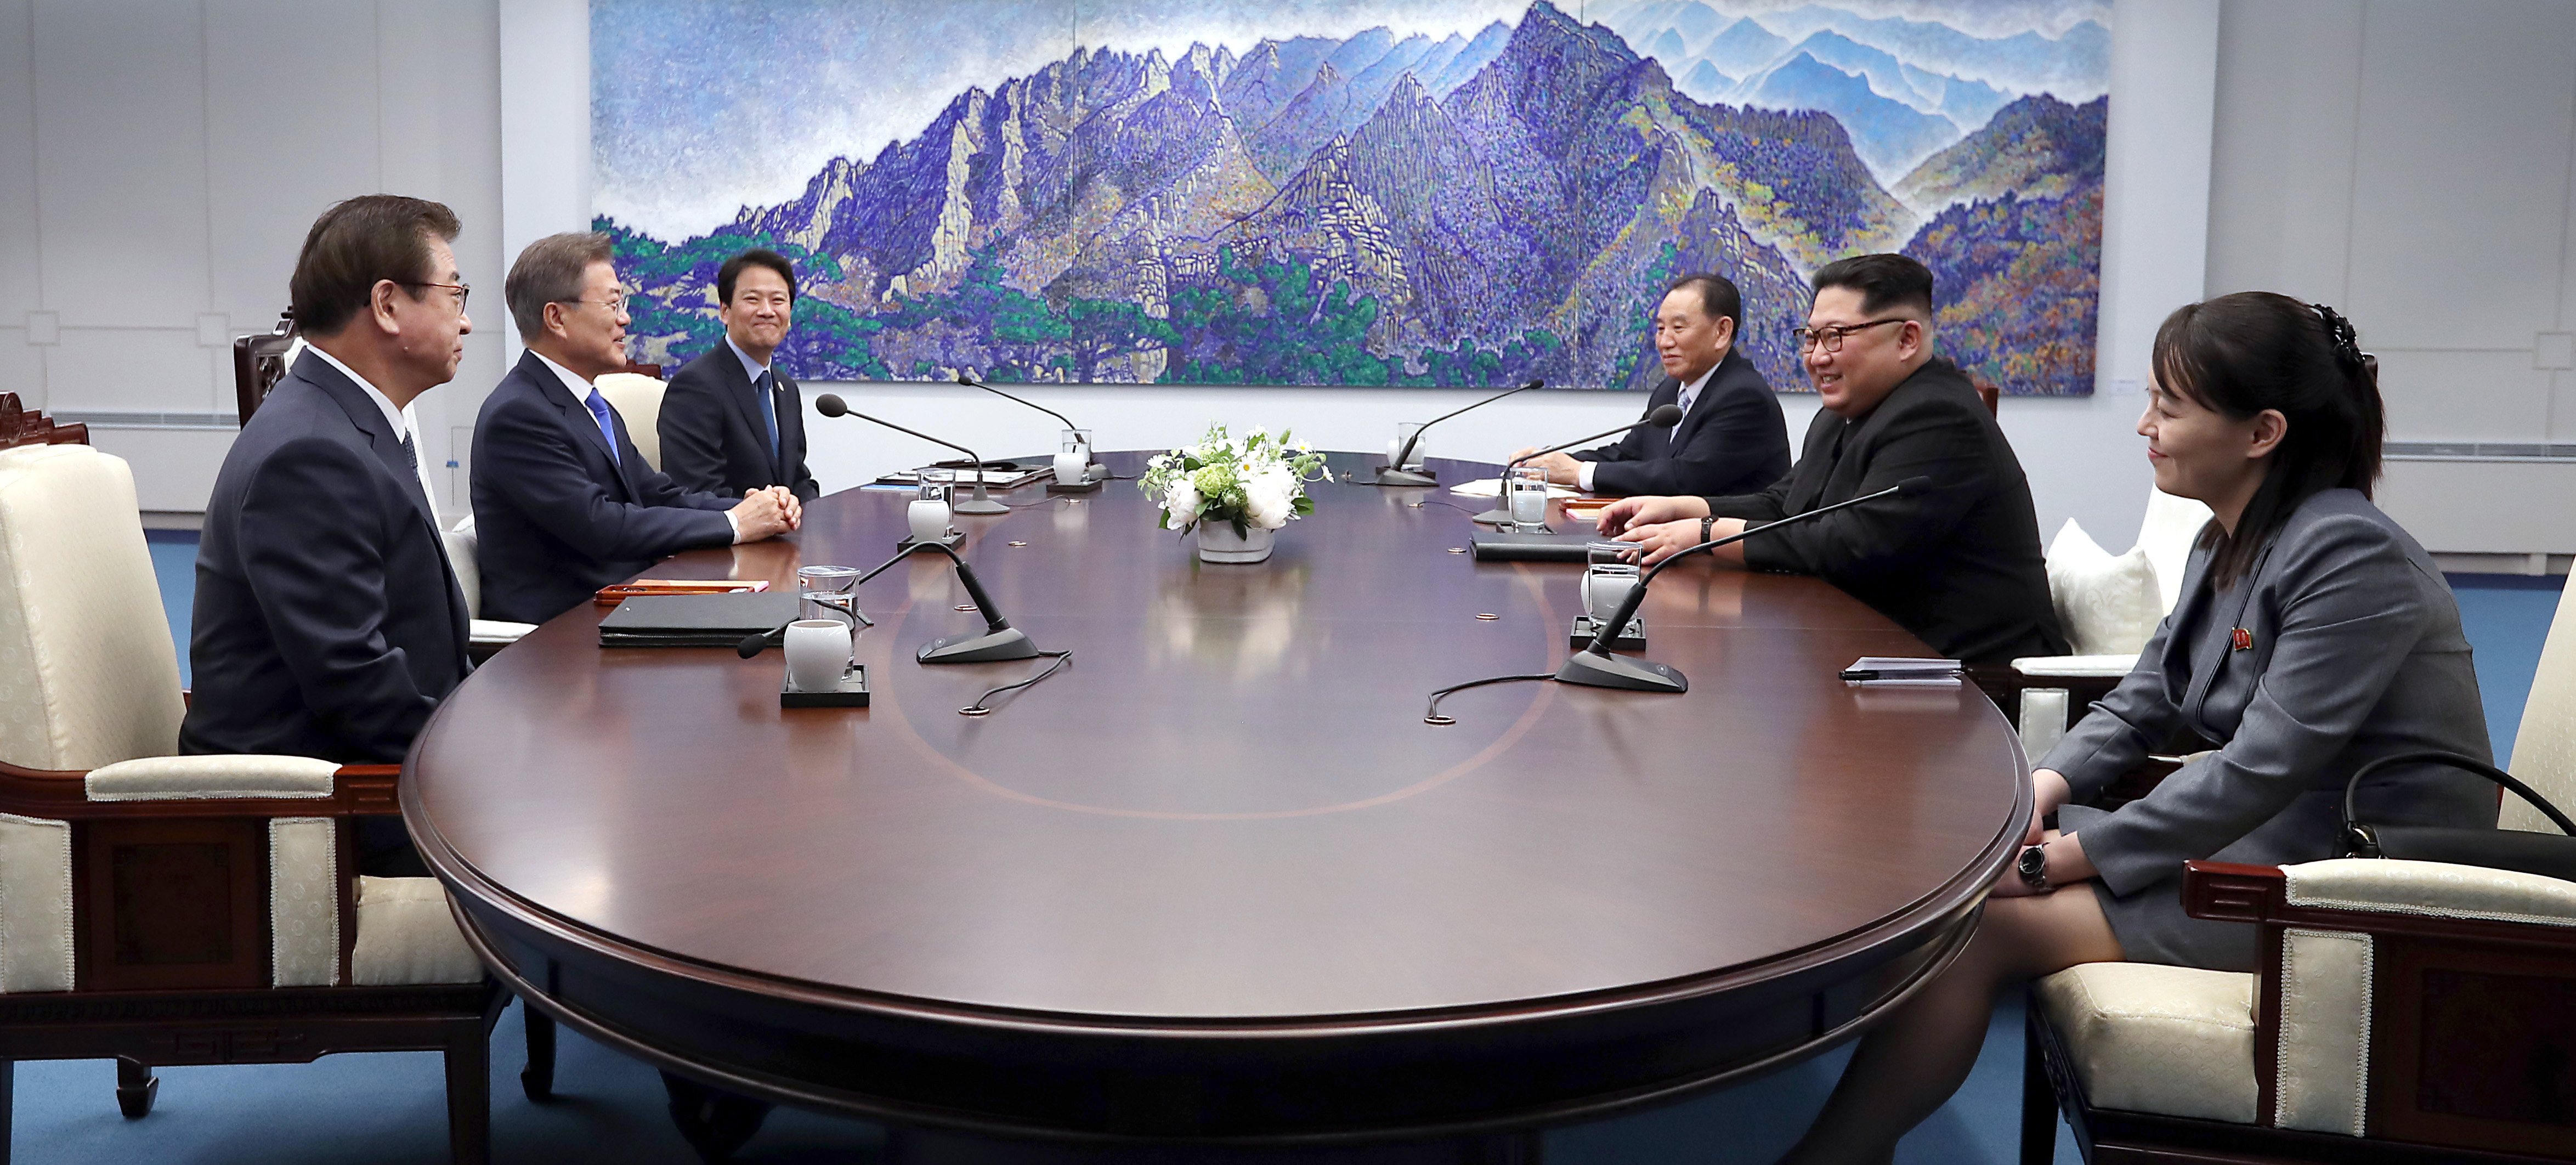 South Korean delegation including President Moon Jae-in and North Korean delegation including Leader Kim Jong Un sit down for the Inter-Korean Summit at the Peace House on April 27, 2018. (Korea Summit Press Pool—Getty Images)